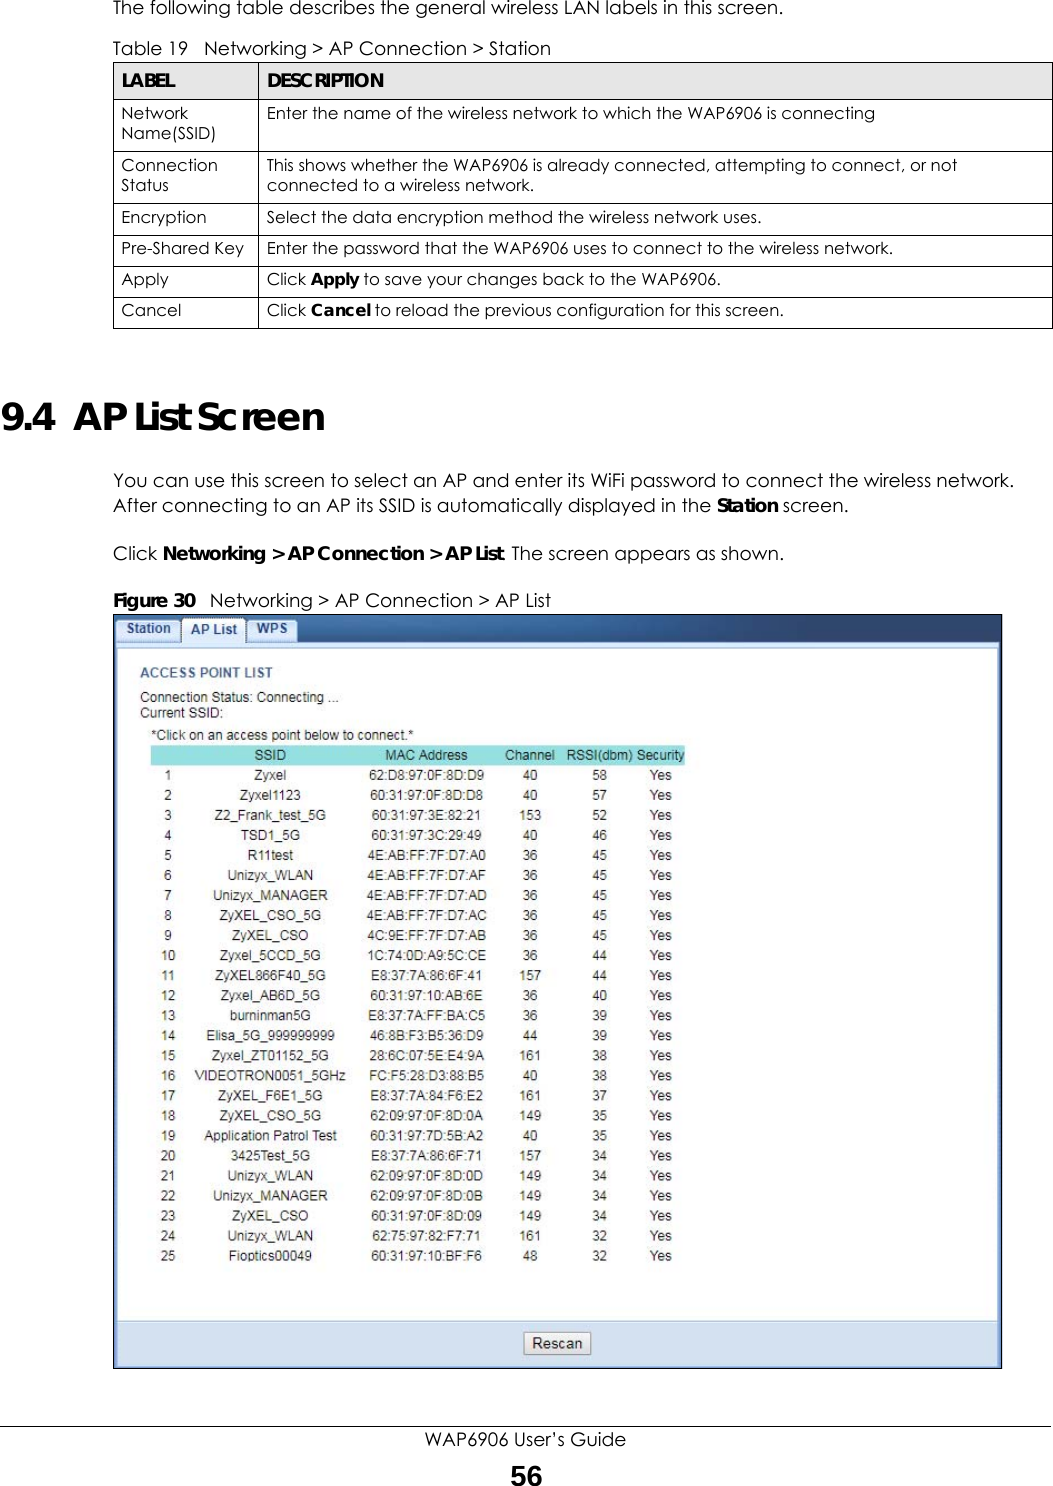 WAP6906 User’s Guide56The following table describes the general wireless LAN labels in this screen.9.4  AP List ScreenYou can use this screen to select an AP and enter its WiFi password to connect the wireless network. After connecting to an AP its SSID is automatically displayed in the Station screen.Click Networking &gt; AP Connection &gt; AP List. The screen appears as shown.Figure 30   Networking &gt; AP Connection &gt; AP List  Table 19   Networking &gt; AP Connection &gt; StationLABEL DESCRIPTIONNetwork Name(SSID)Enter the name of the wireless network to which the WAP6906 is connectingConnection StatusThis shows whether the WAP6906 is already connected, attempting to connect, or not connected to a wireless network.Encryption Select the data encryption method the wireless network uses.Pre-Shared Key Enter the password that the WAP6906 uses to connect to the wireless network. Apply Click Apply to save your changes back to the WAP6906.Cancel Click Cancel to reload the previous configuration for this screen.